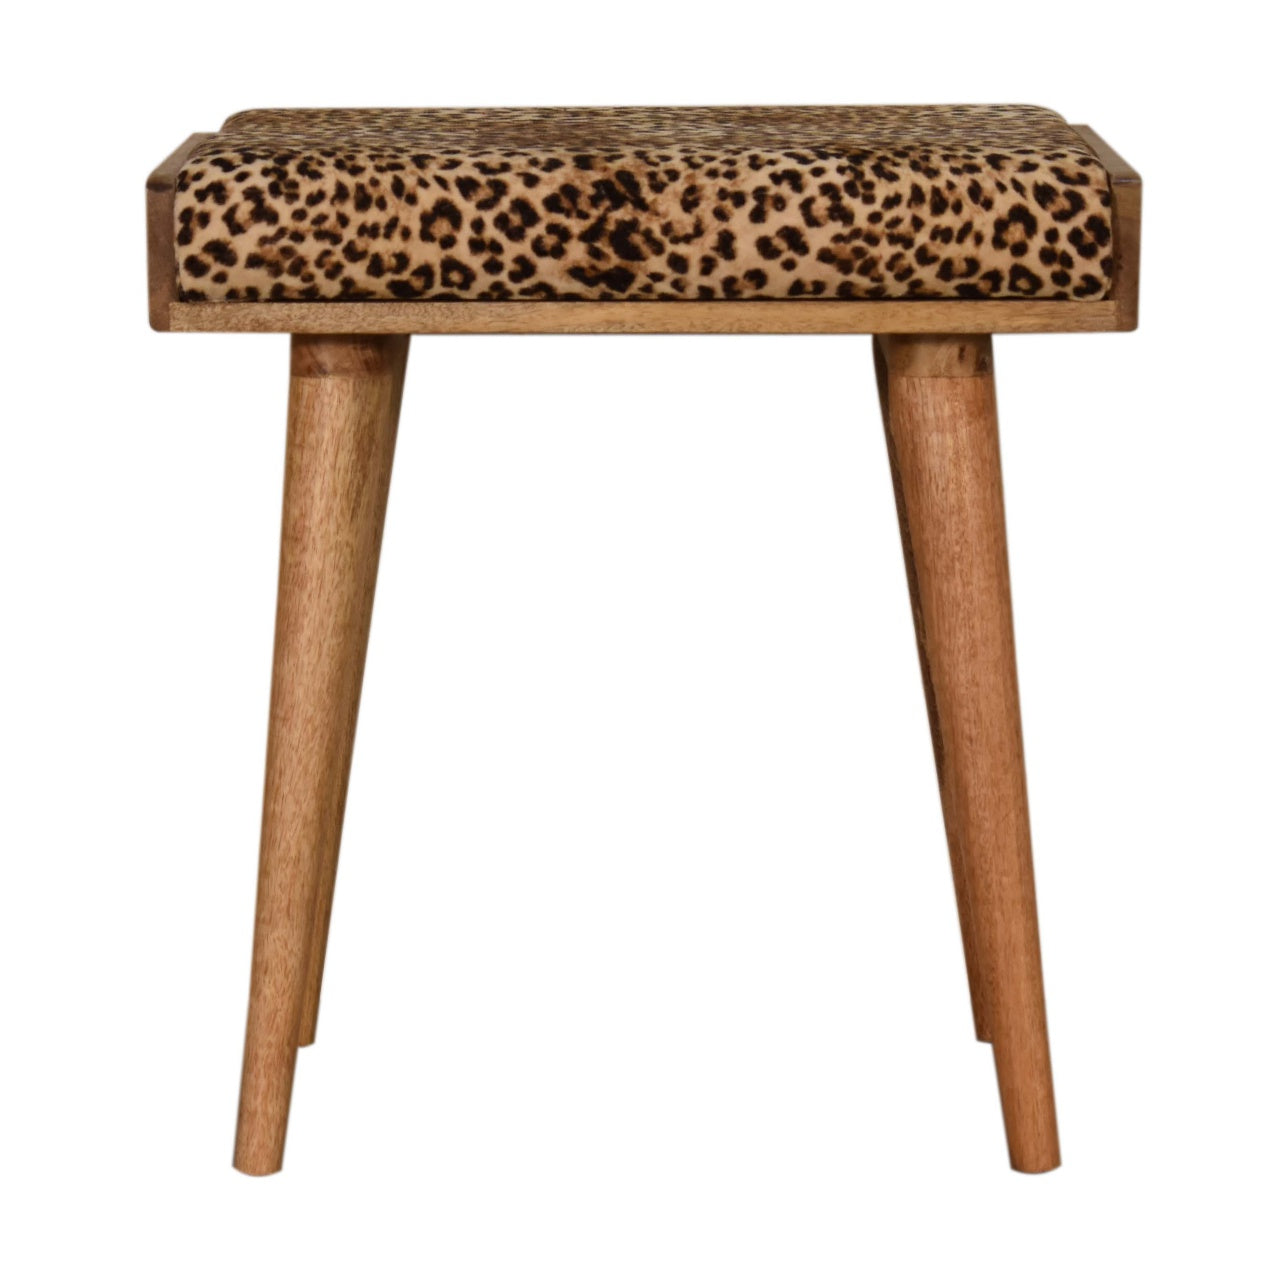 View Leopard Velvet Tray Style Footstool information